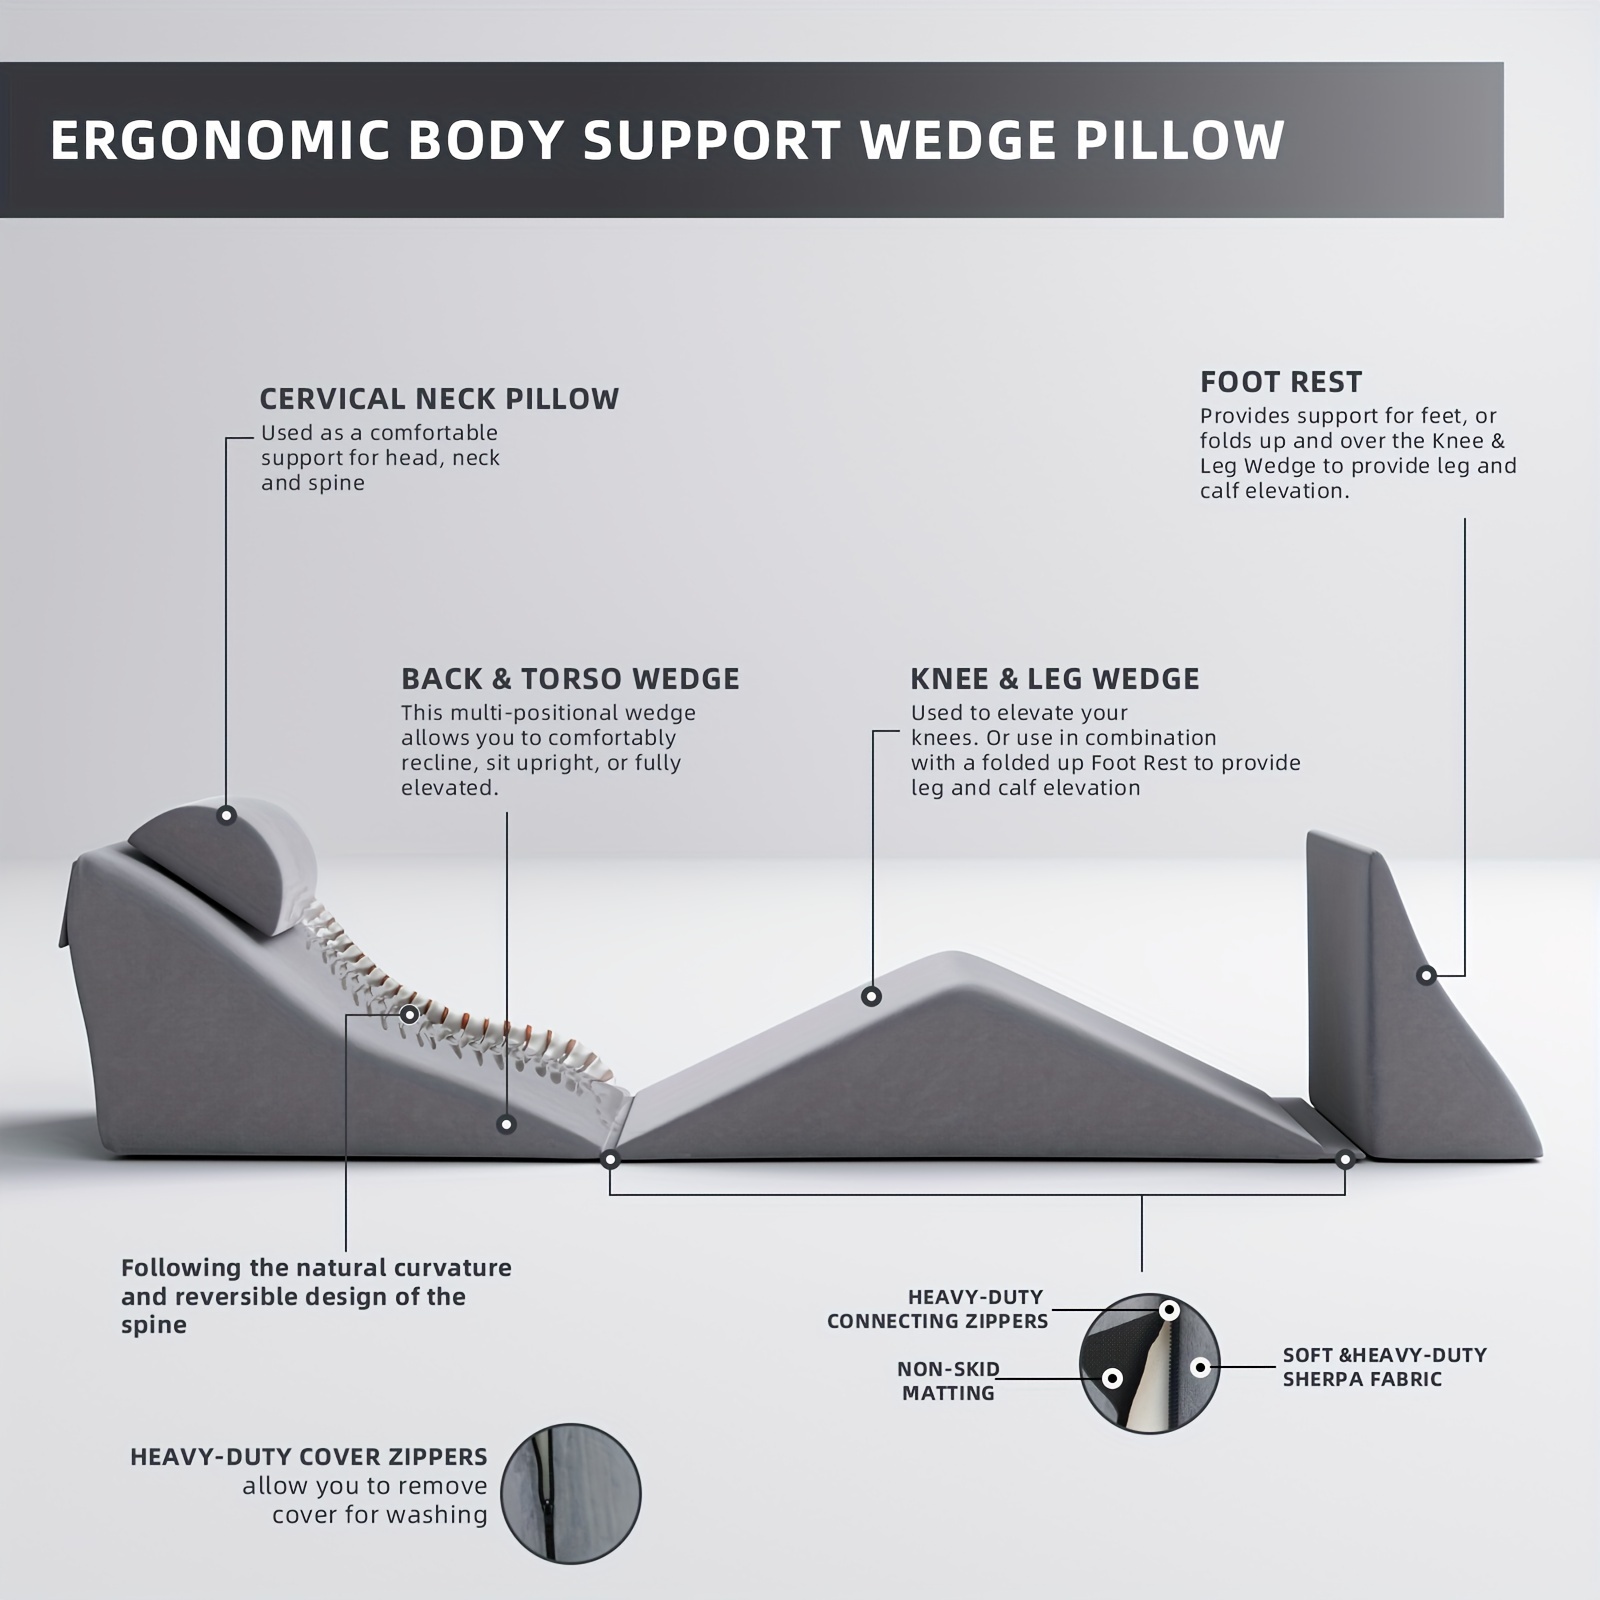 Foam Bed Wedge Elevates Your Body In A Zero-Gravity Position